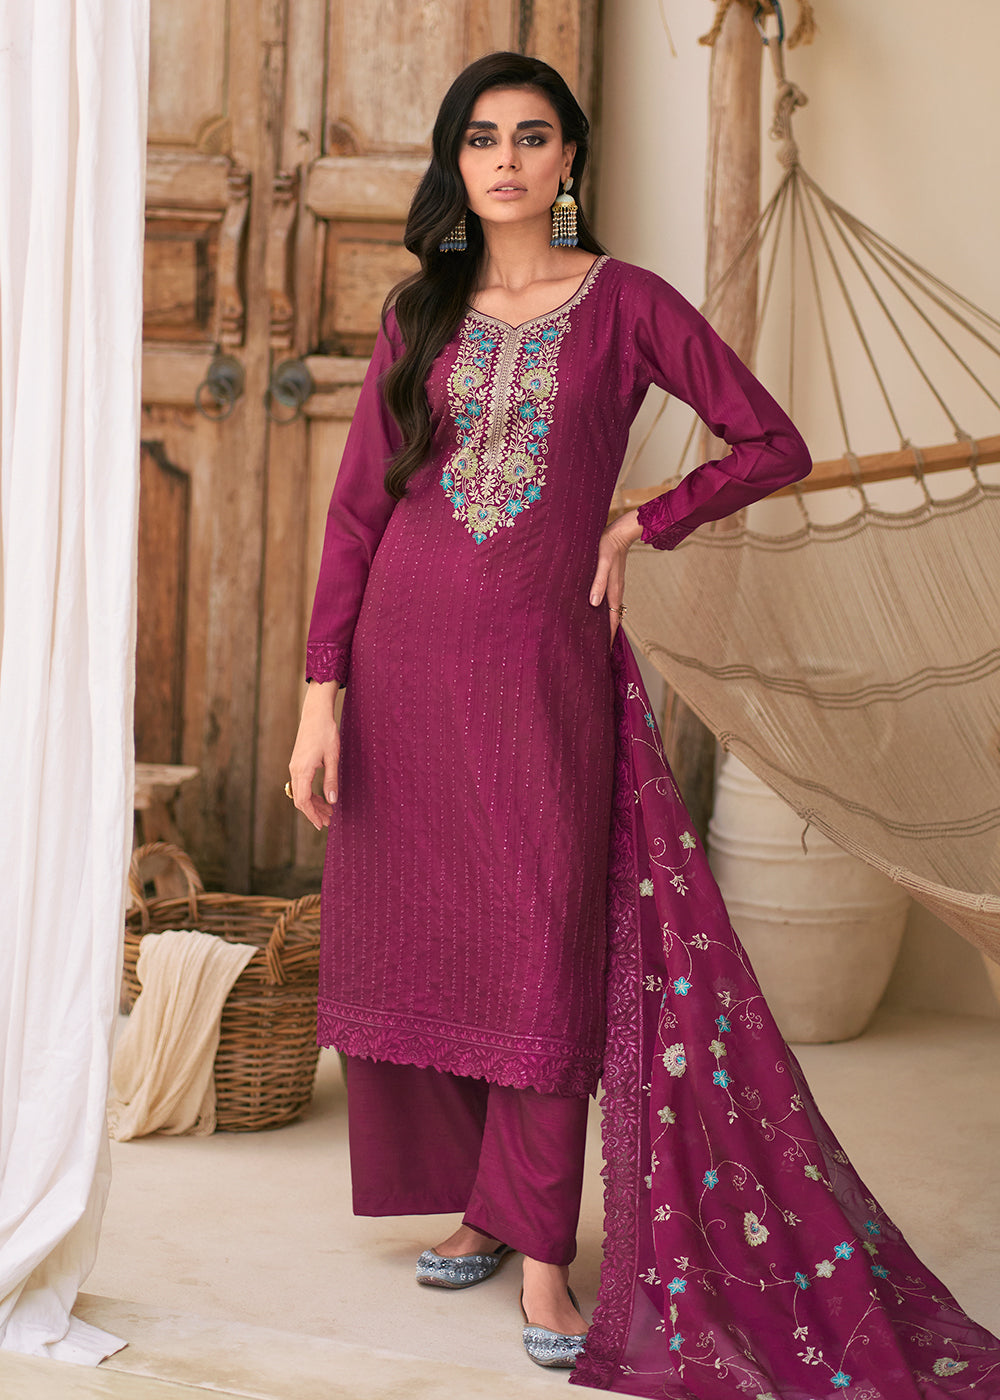 Buy Now Embroidered Pink Dola Silk Festive Style Salwar Suit Online in USA, UK, Canada, Germany, Australia & Worldwide at Empress Clothing. 